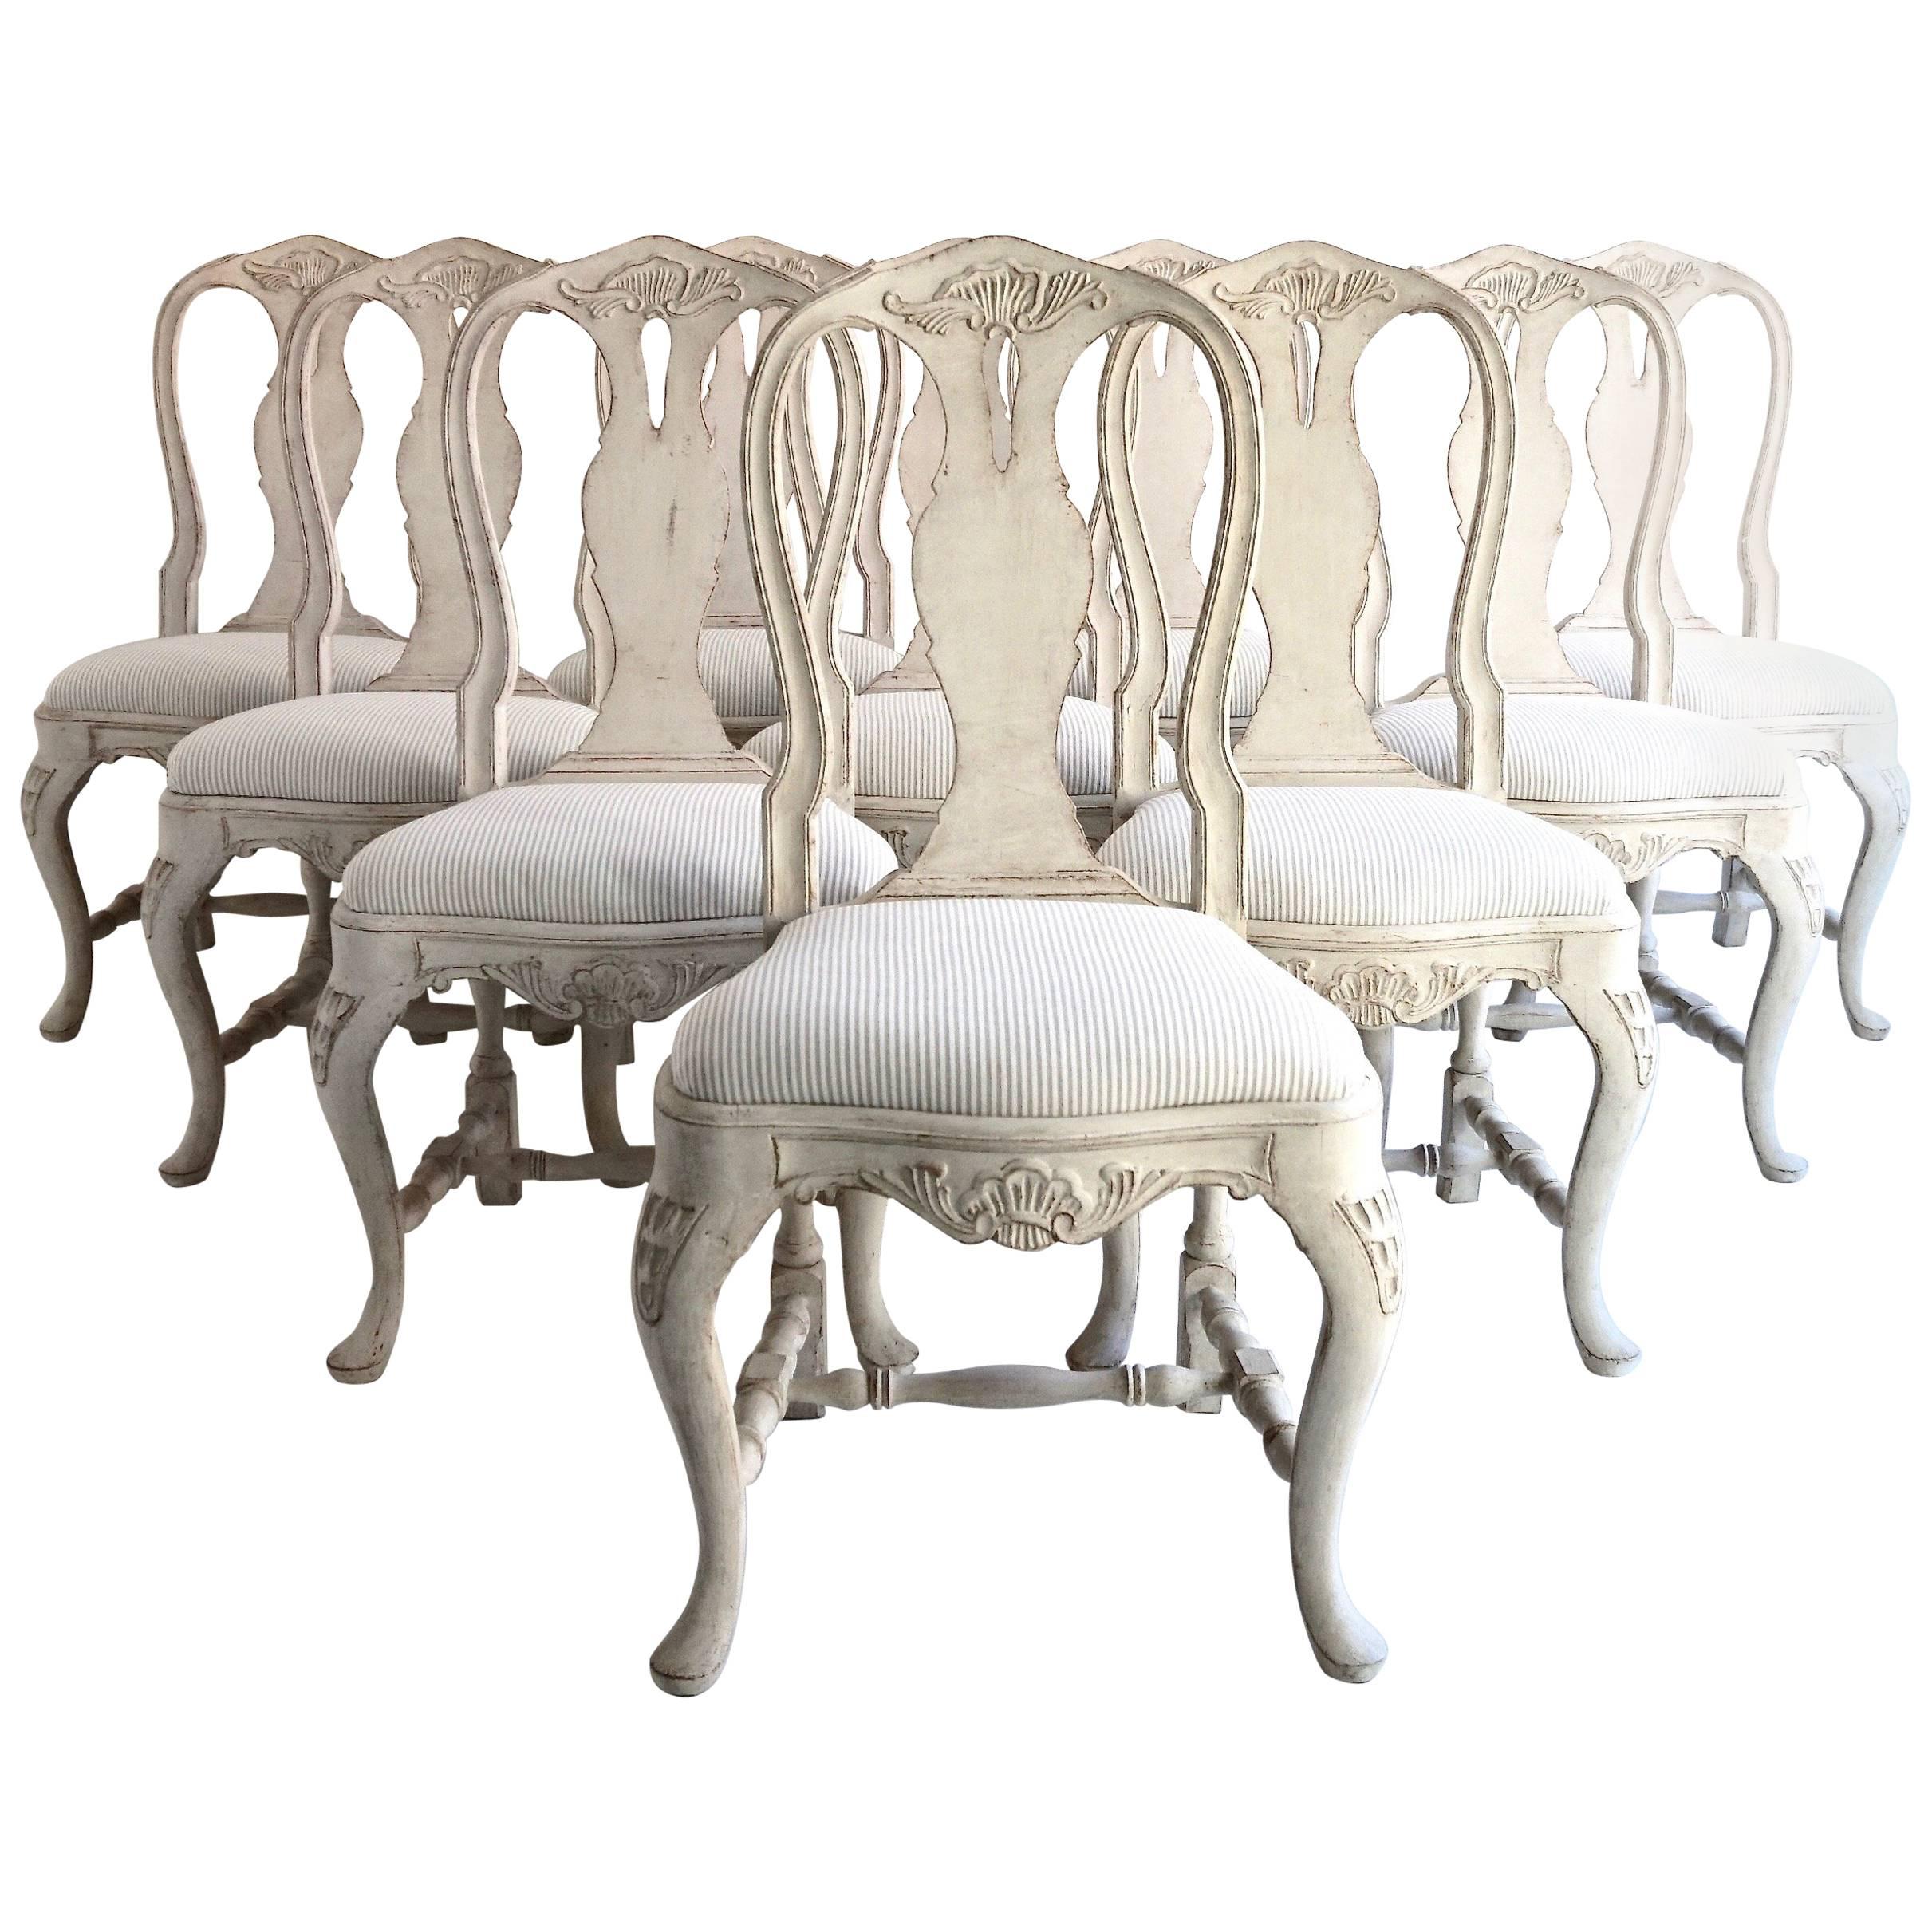 Set of Ten Antique Swedish Rococo Style Dining Chairs